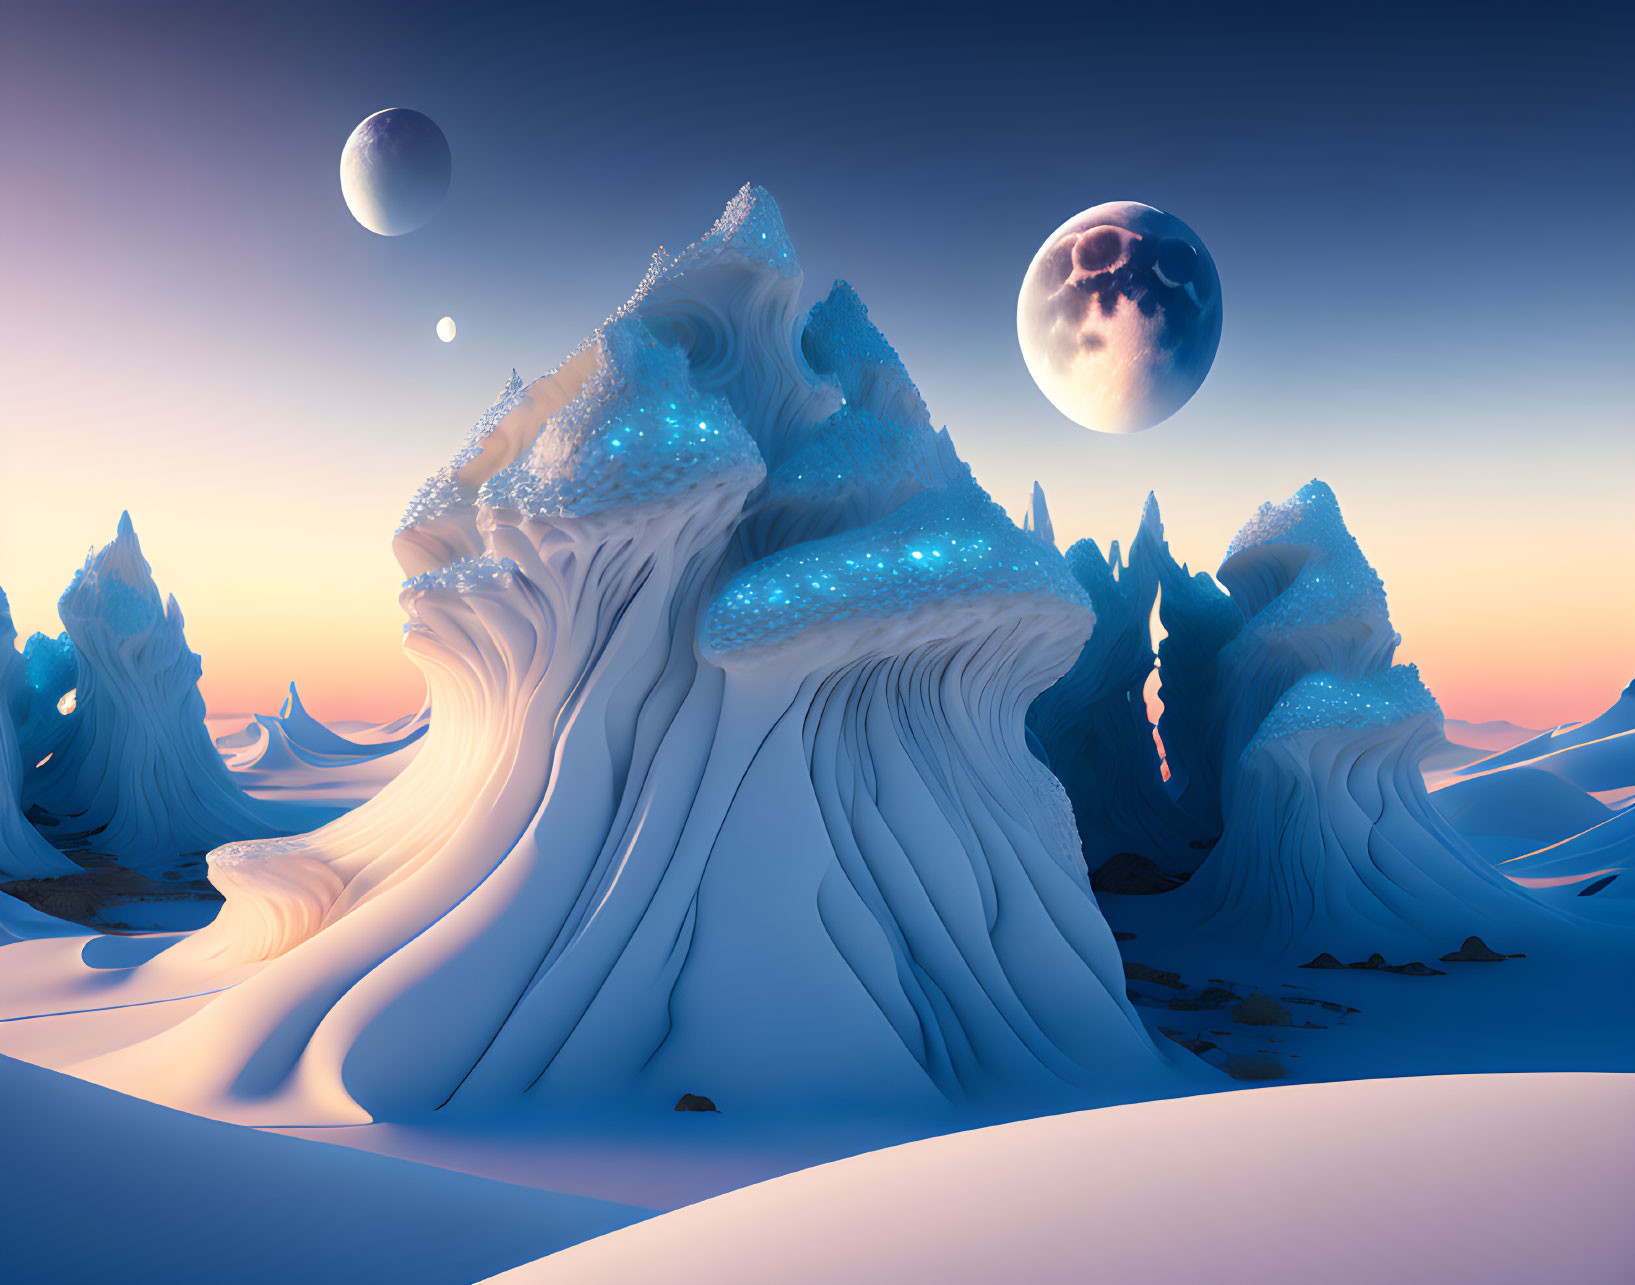 Surreal landscape featuring glowing tree-like structures on snow-covered ground under two moons and a distant planet